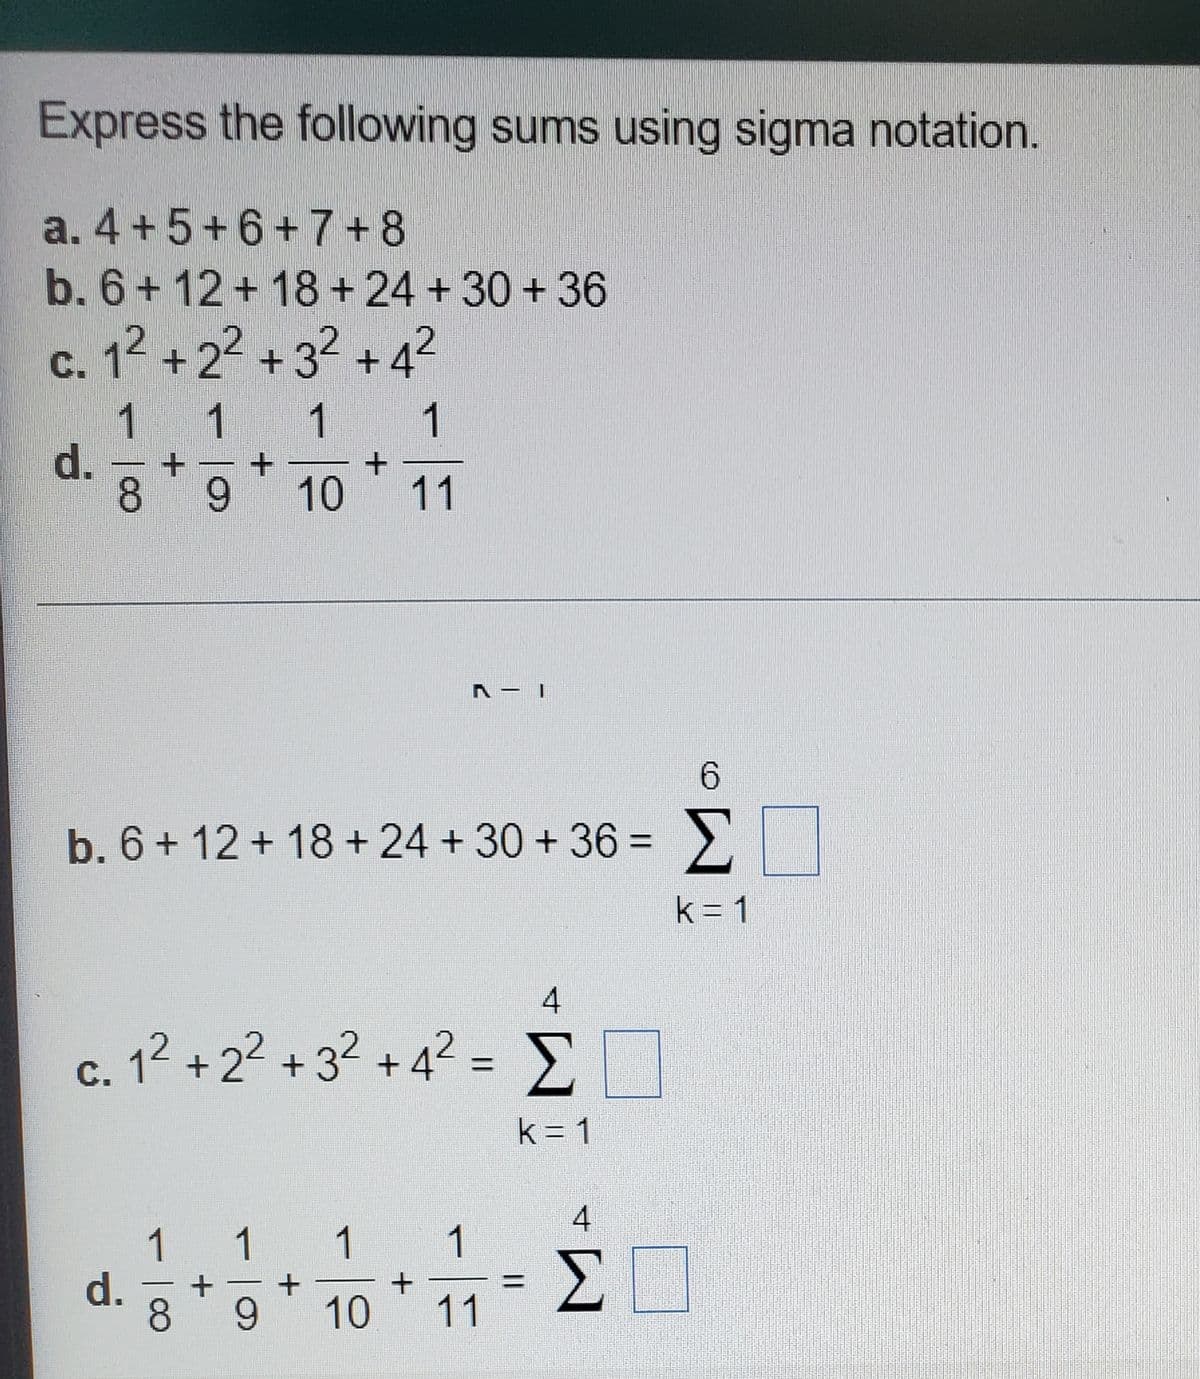 Express the following sums using sigma notation.
a. 4 +5+6+7+8
b. 6+ 12+ 18+24 +30 + 36
c. 12 +22 + 32 +42
1 1 1
d.
8
1
9 10 11
6.
b. 6+ 12 + 18 + 24 + 30 + 36 = >
%3D
k= 1
c. 12 + 22 + 3? + 4² = >
с.
k = 1
4
1
1
1
1
d.
8.
ΣΠ
+
9.
10
11
寸
